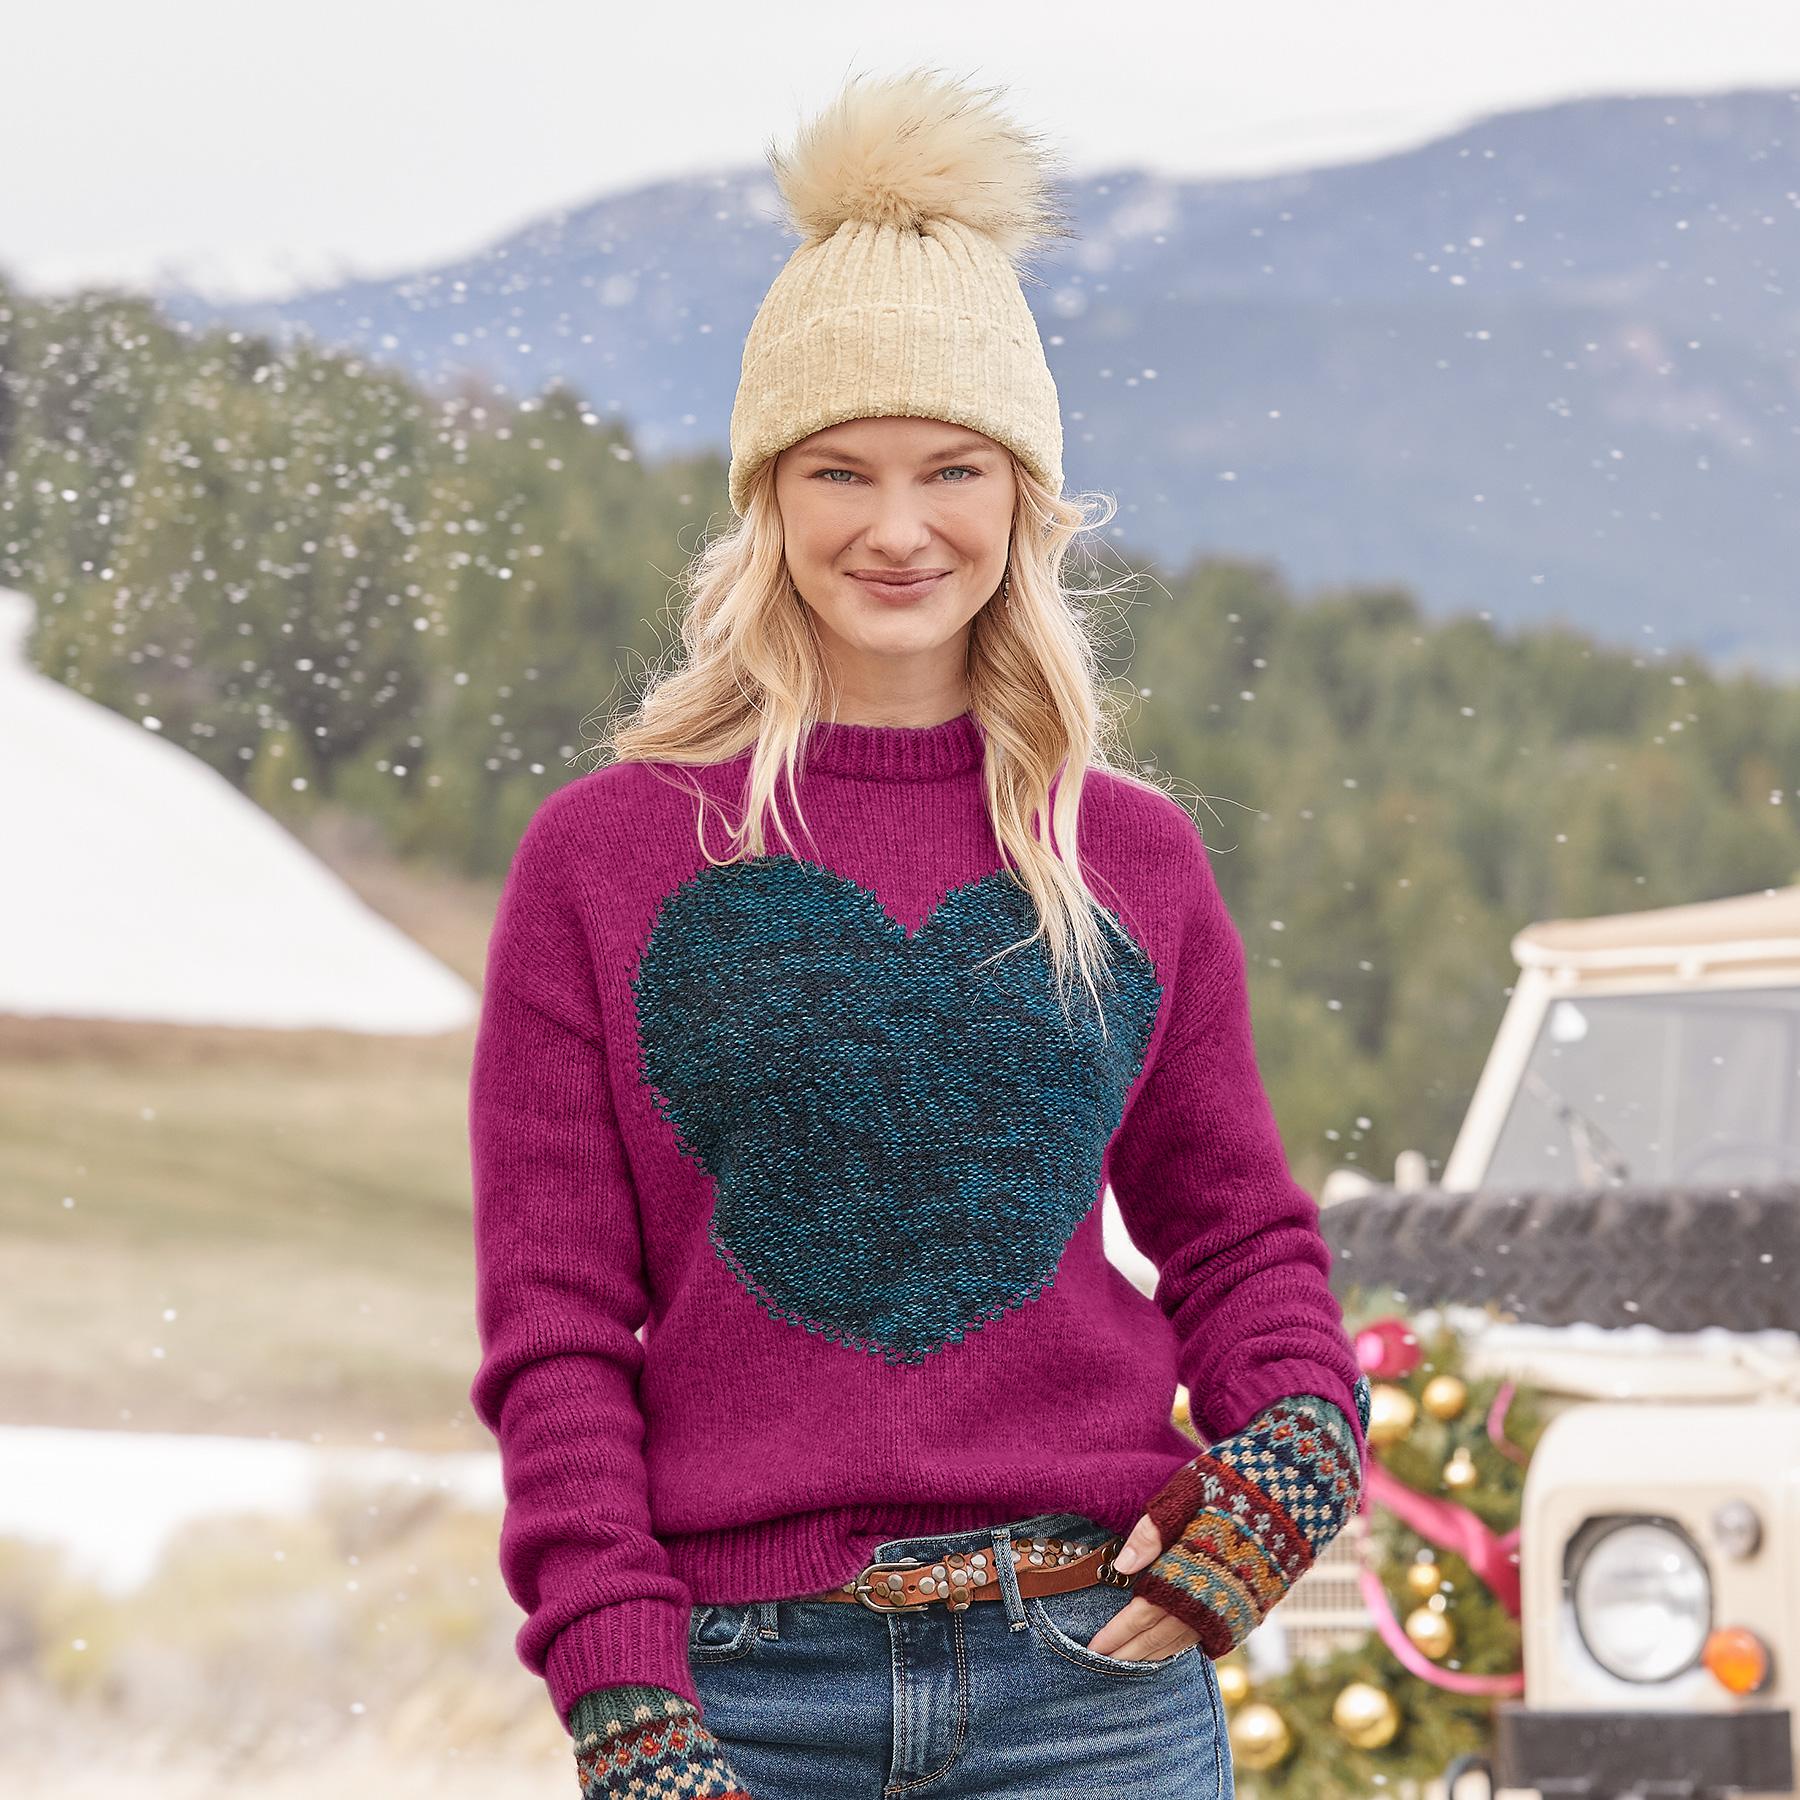 Monogram Accent Cropped Pullover - Ready to Wear